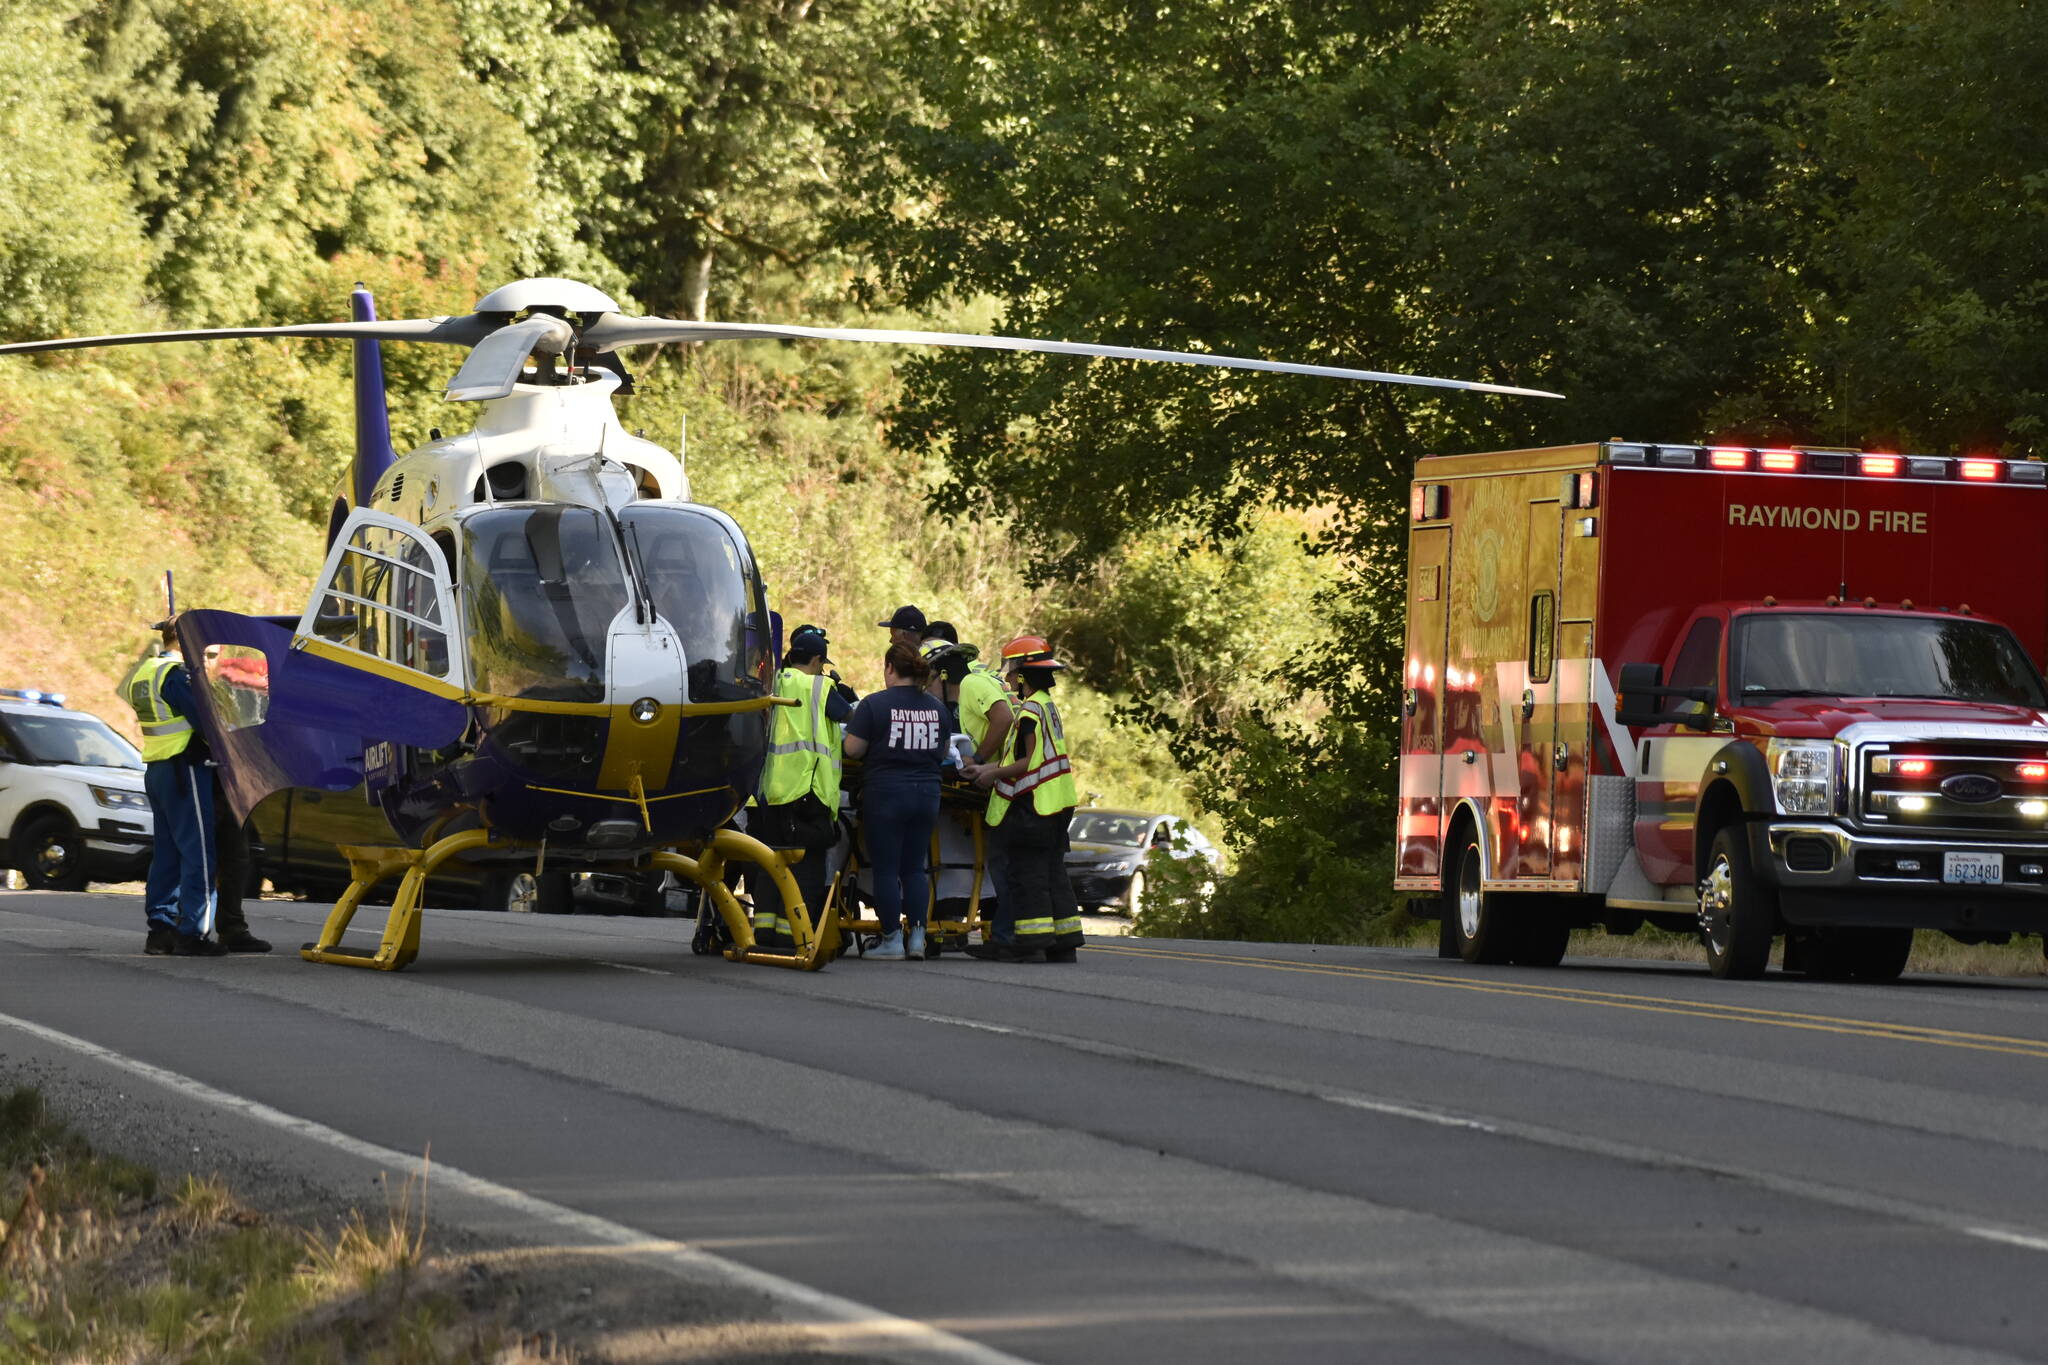 Emergency personnel transport a crash victim onto a Lifeflight helicopter for medevac to a hospital following a single-vehicle motorcycle crash on July 16. (Courtesy photo / Ezra McCampbell)